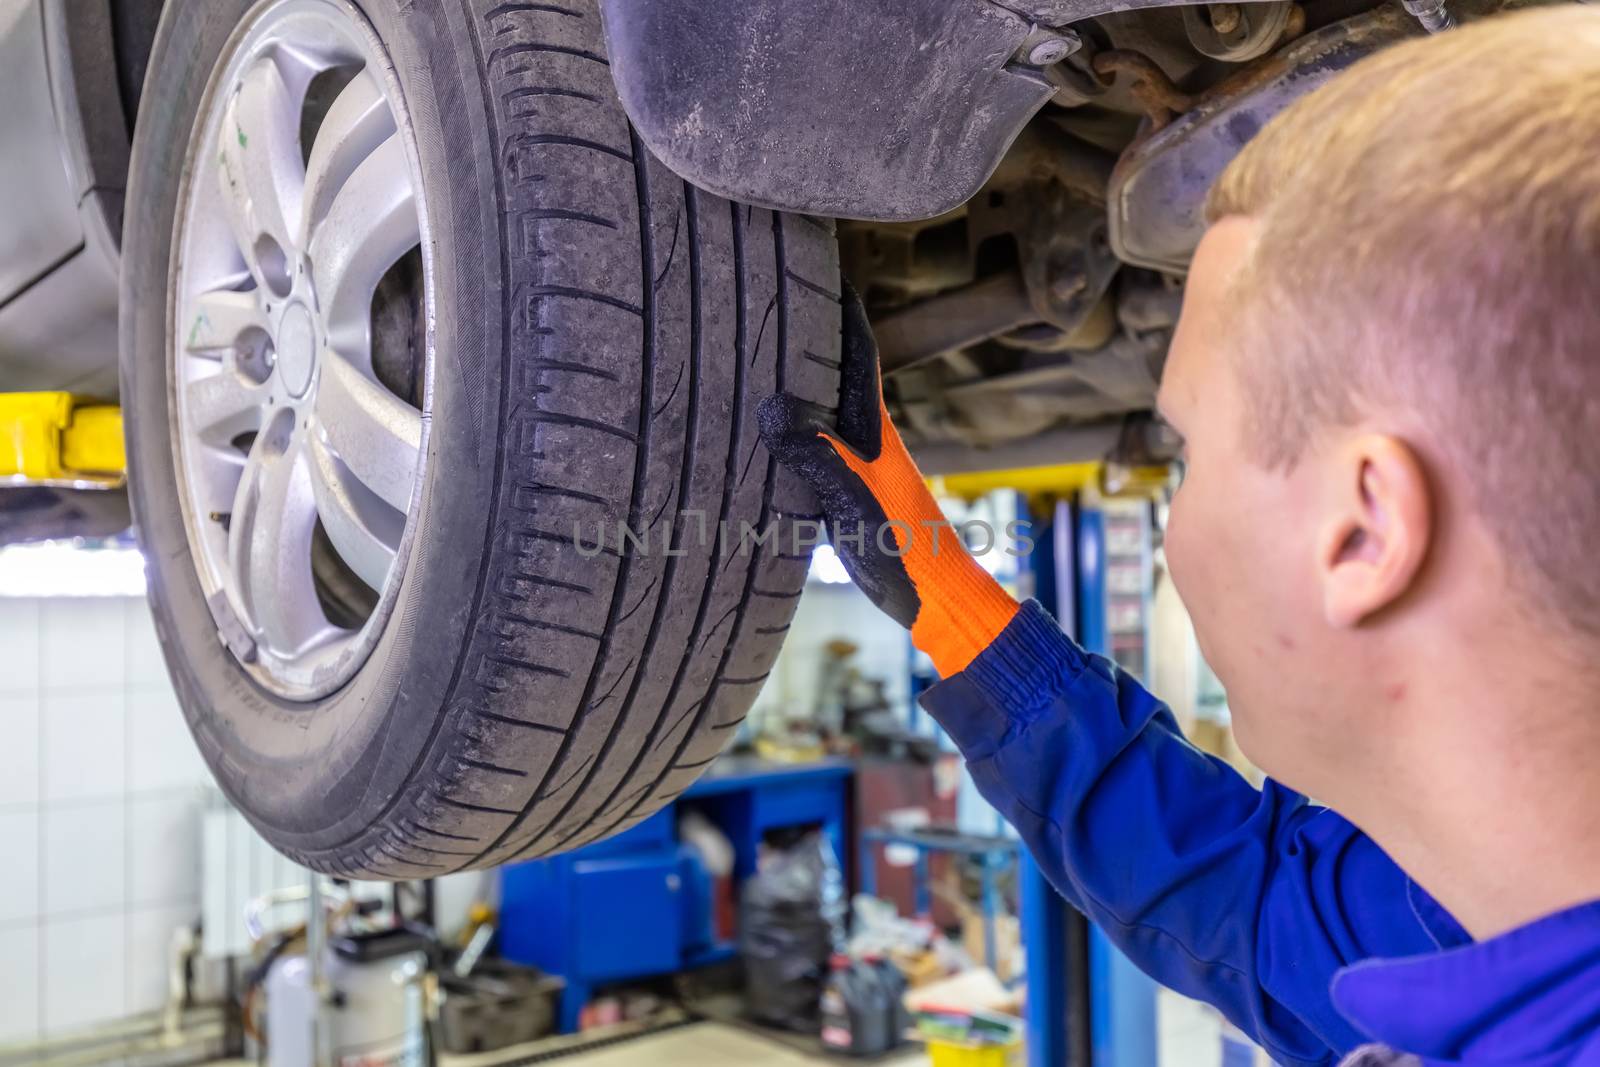 Close-up shot of mechanic checking very attentively surface of a car tire. Mechanic wearing blue coverall and orange gloves. Car is on a hydraulic lift.